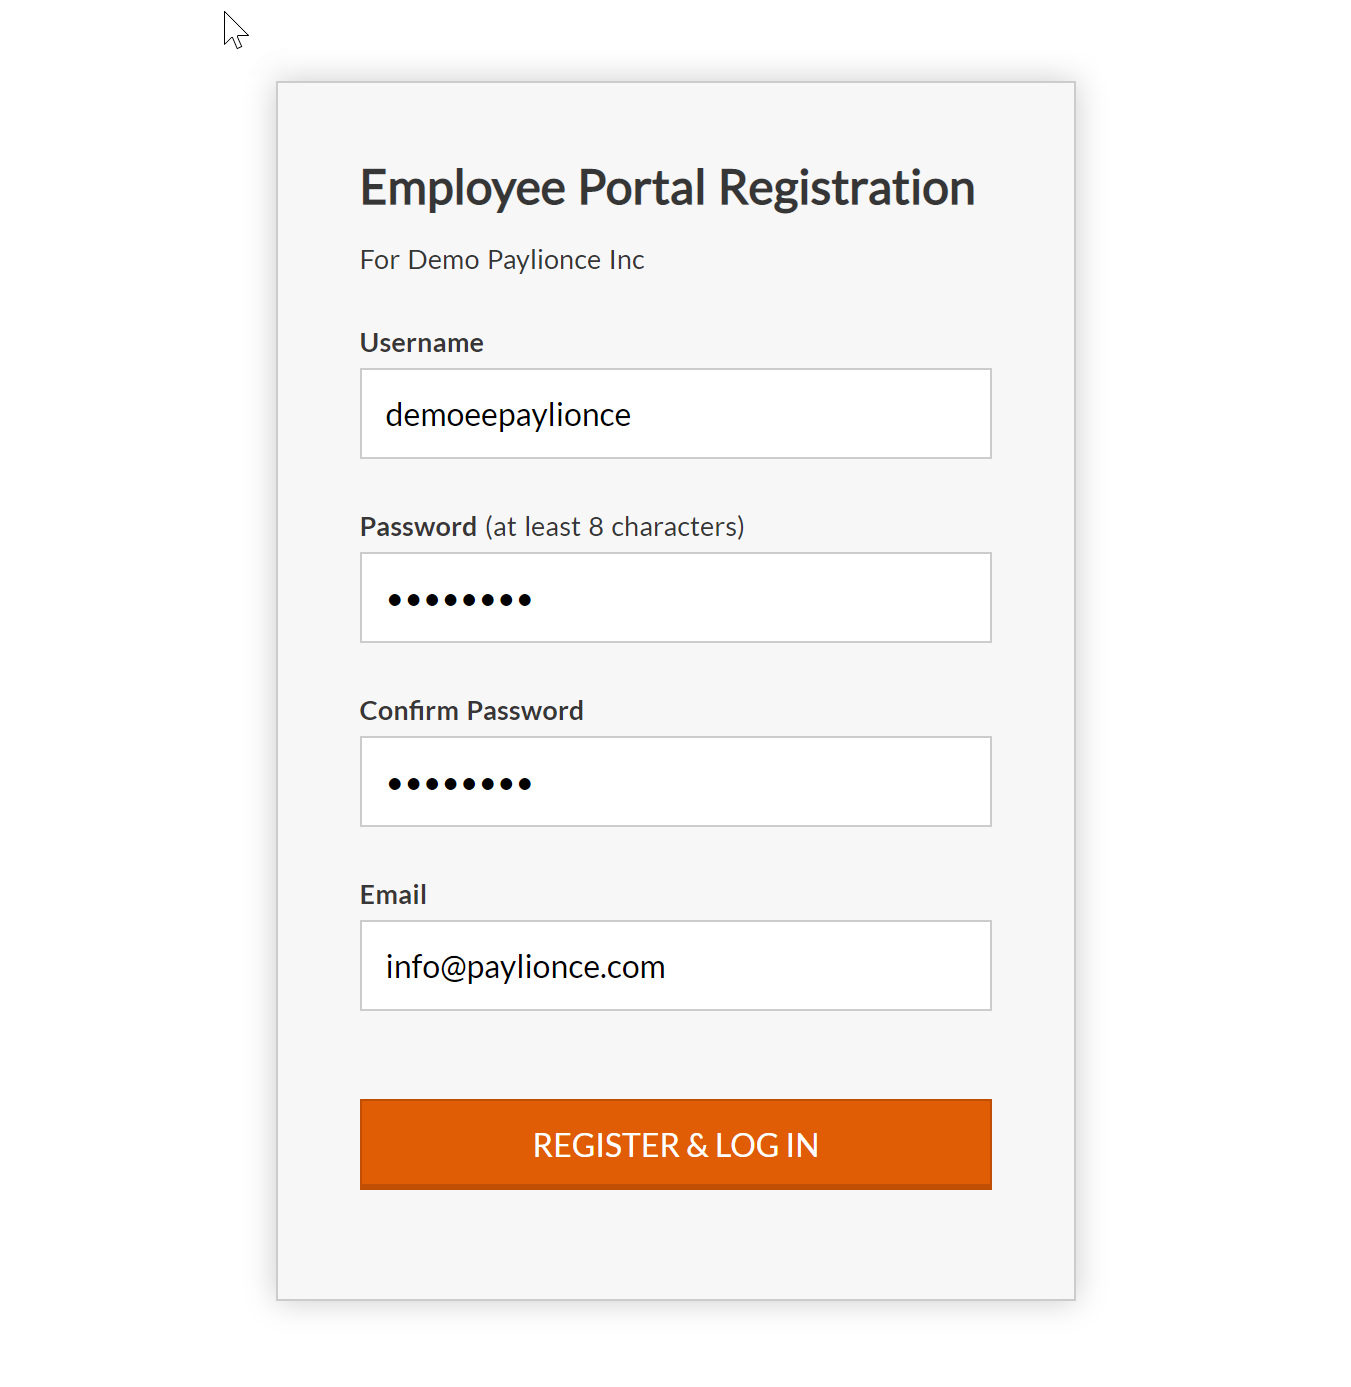 Employee Portal First Time Register Form